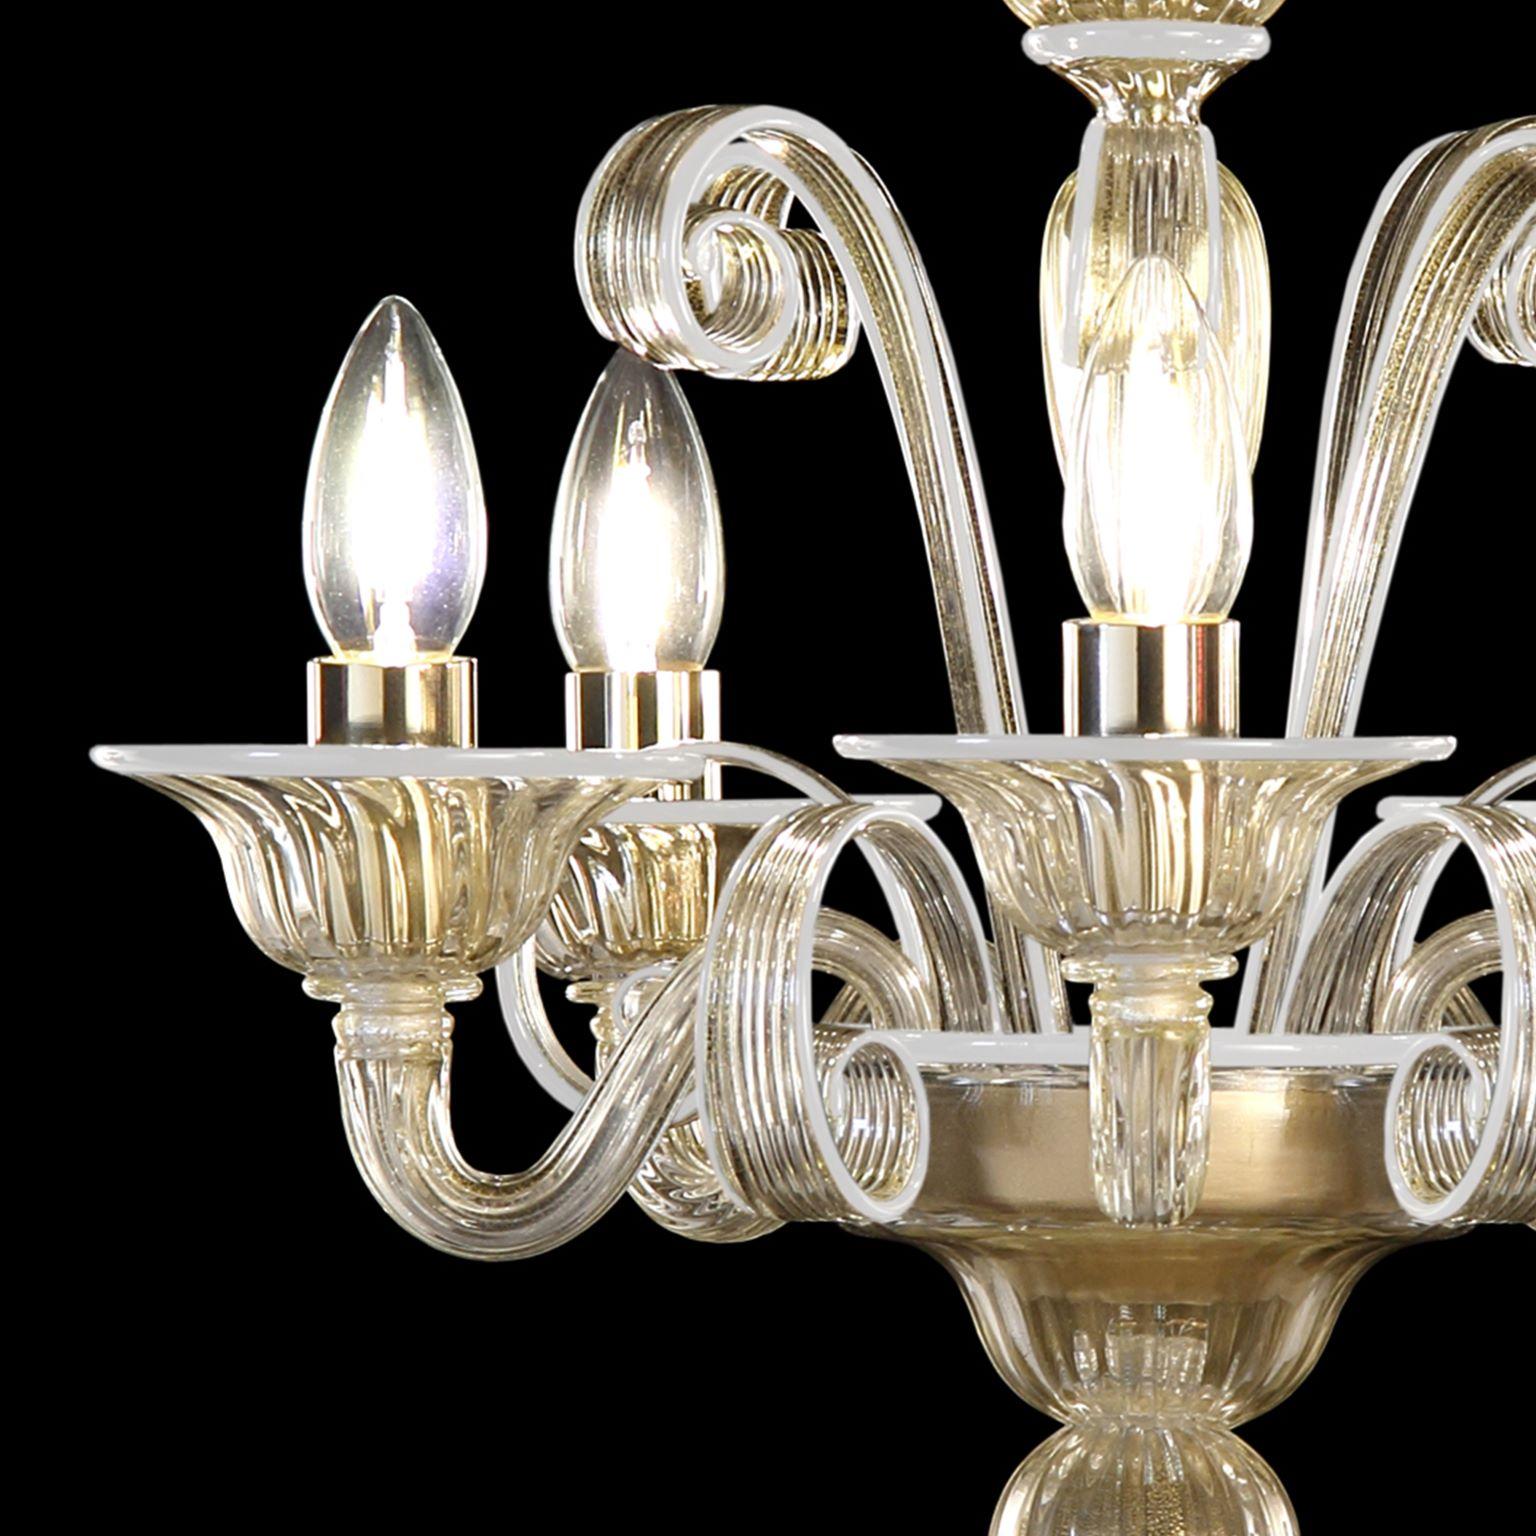 Capriccio chandelier, 5 lights, golden leaf artistic glass, with curly ornamental elements and white details by Multiforme.
Inspired by the Classic Venetian tradition it is characterised by a central column where many blown glass “pastoral” elements